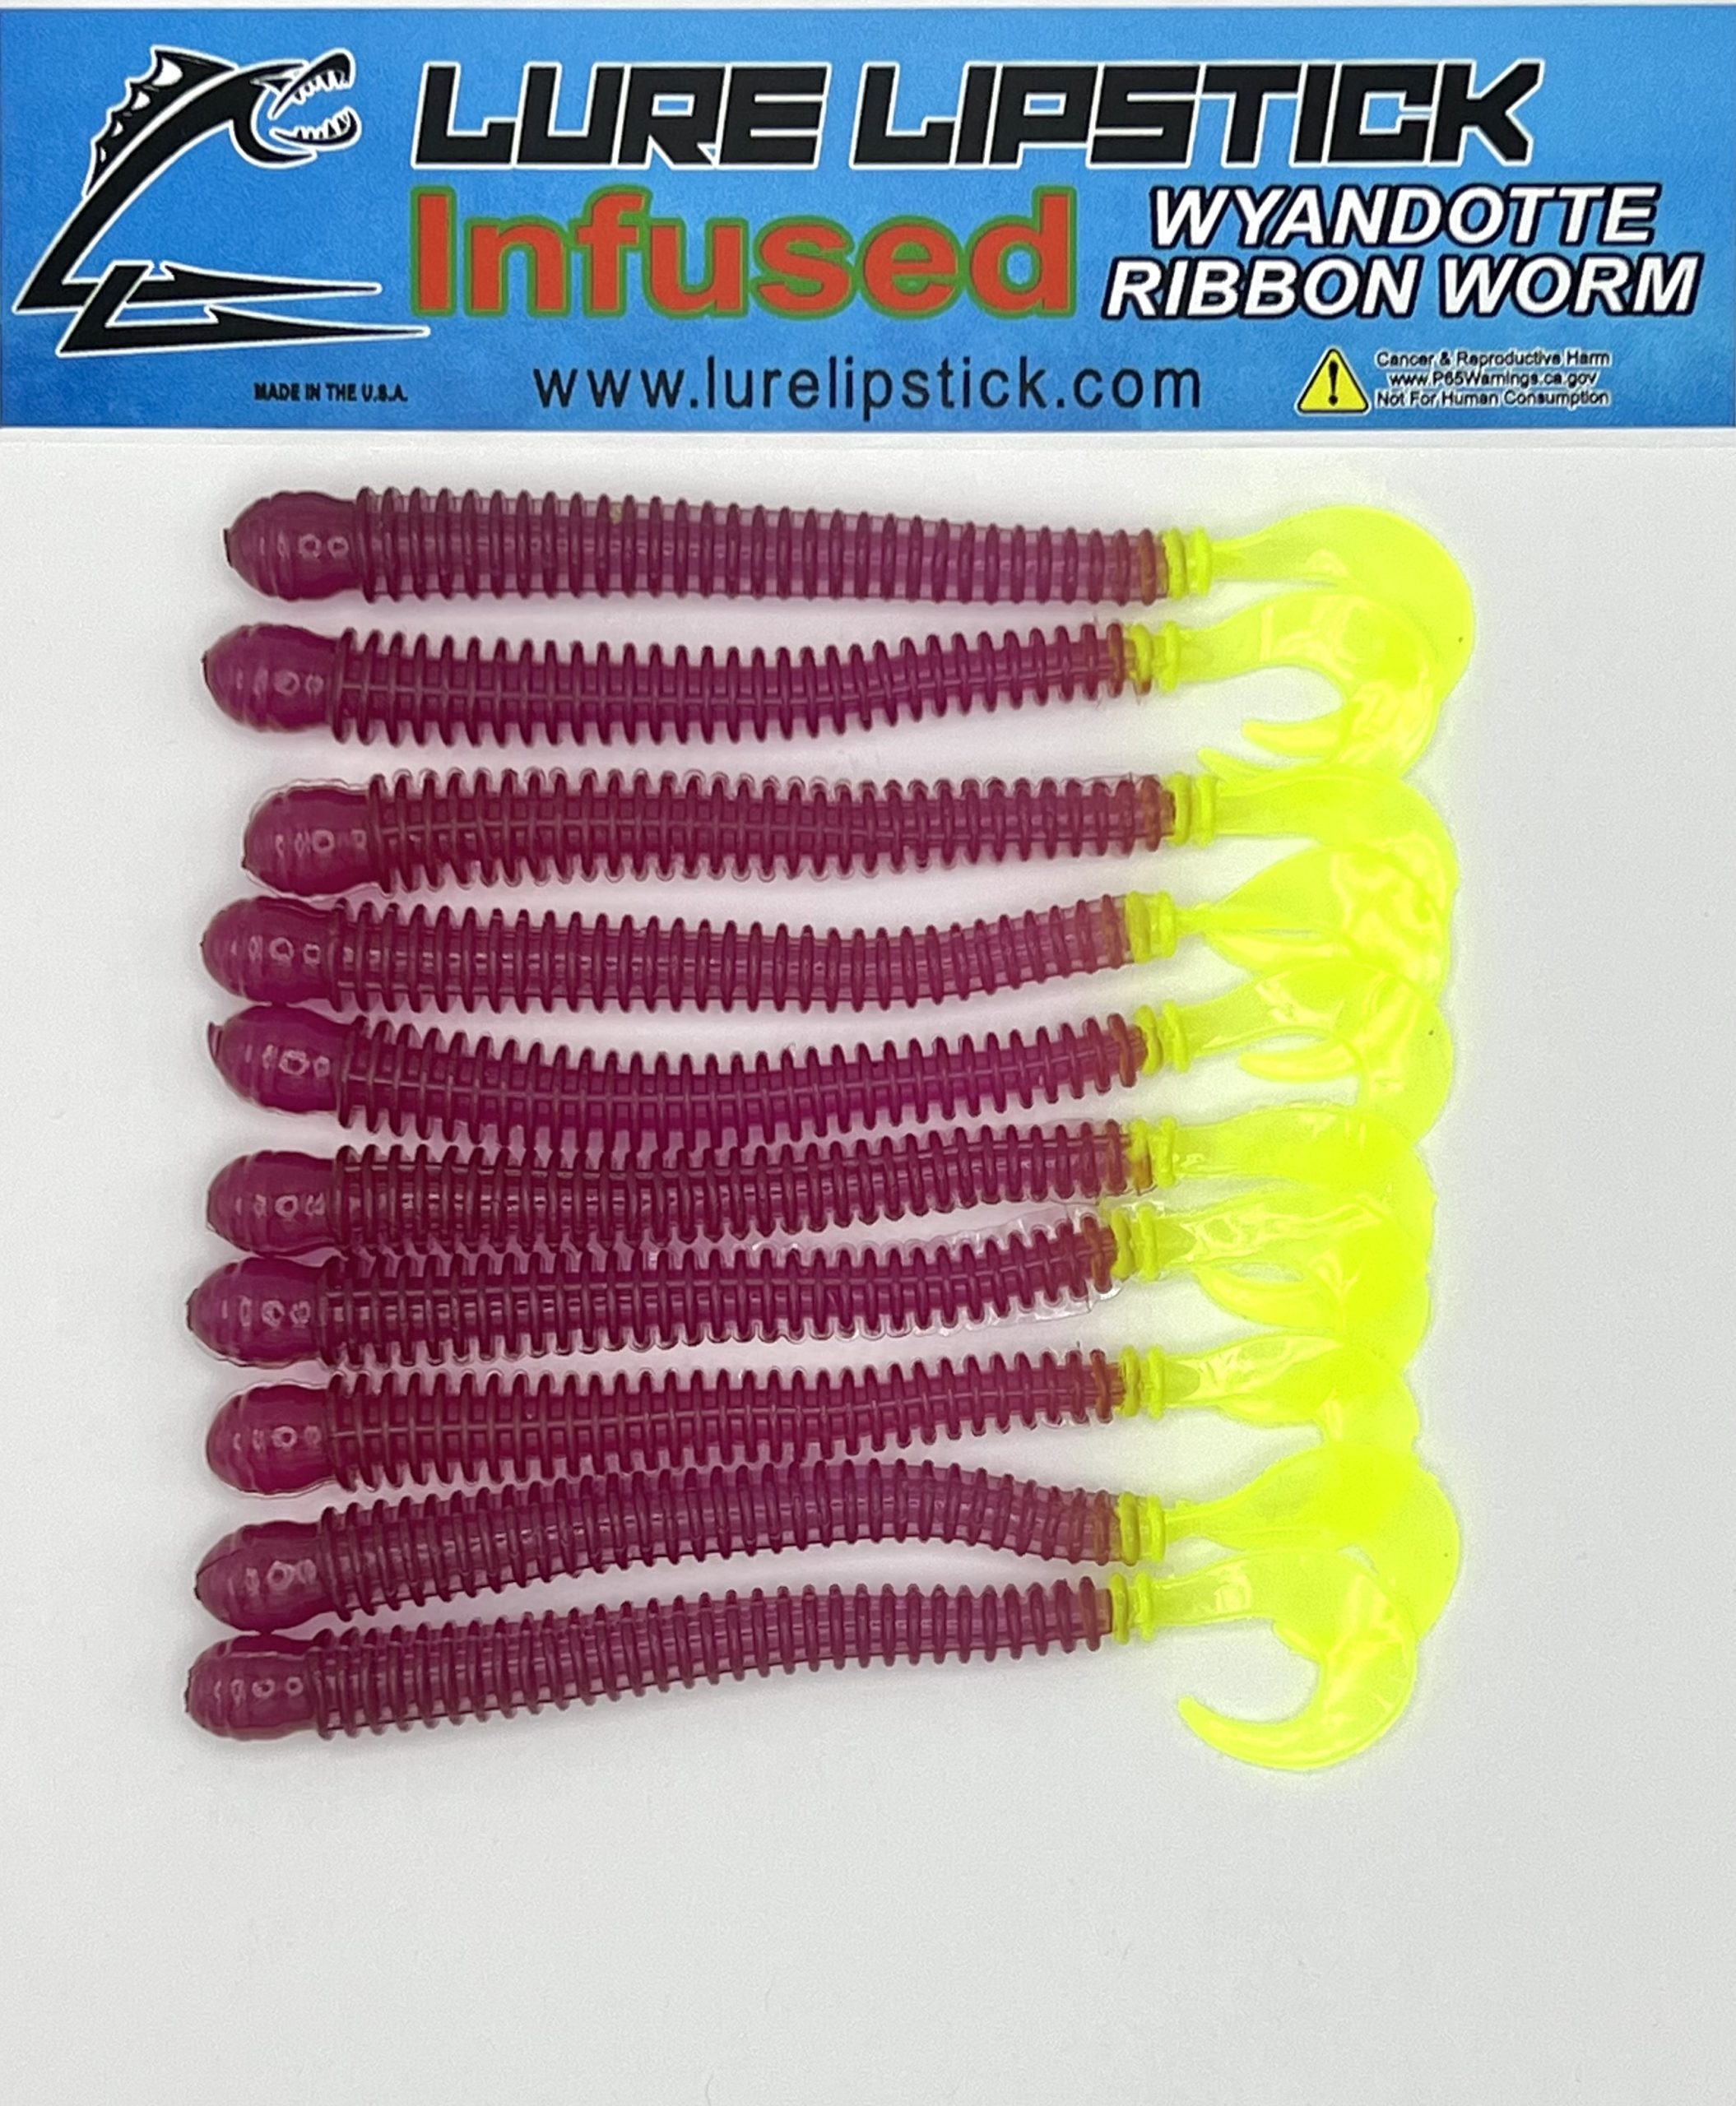 4 inch 10 Pack Infused Custom Wyandotte Ribbon Worms -Purple Chartreuse Tail